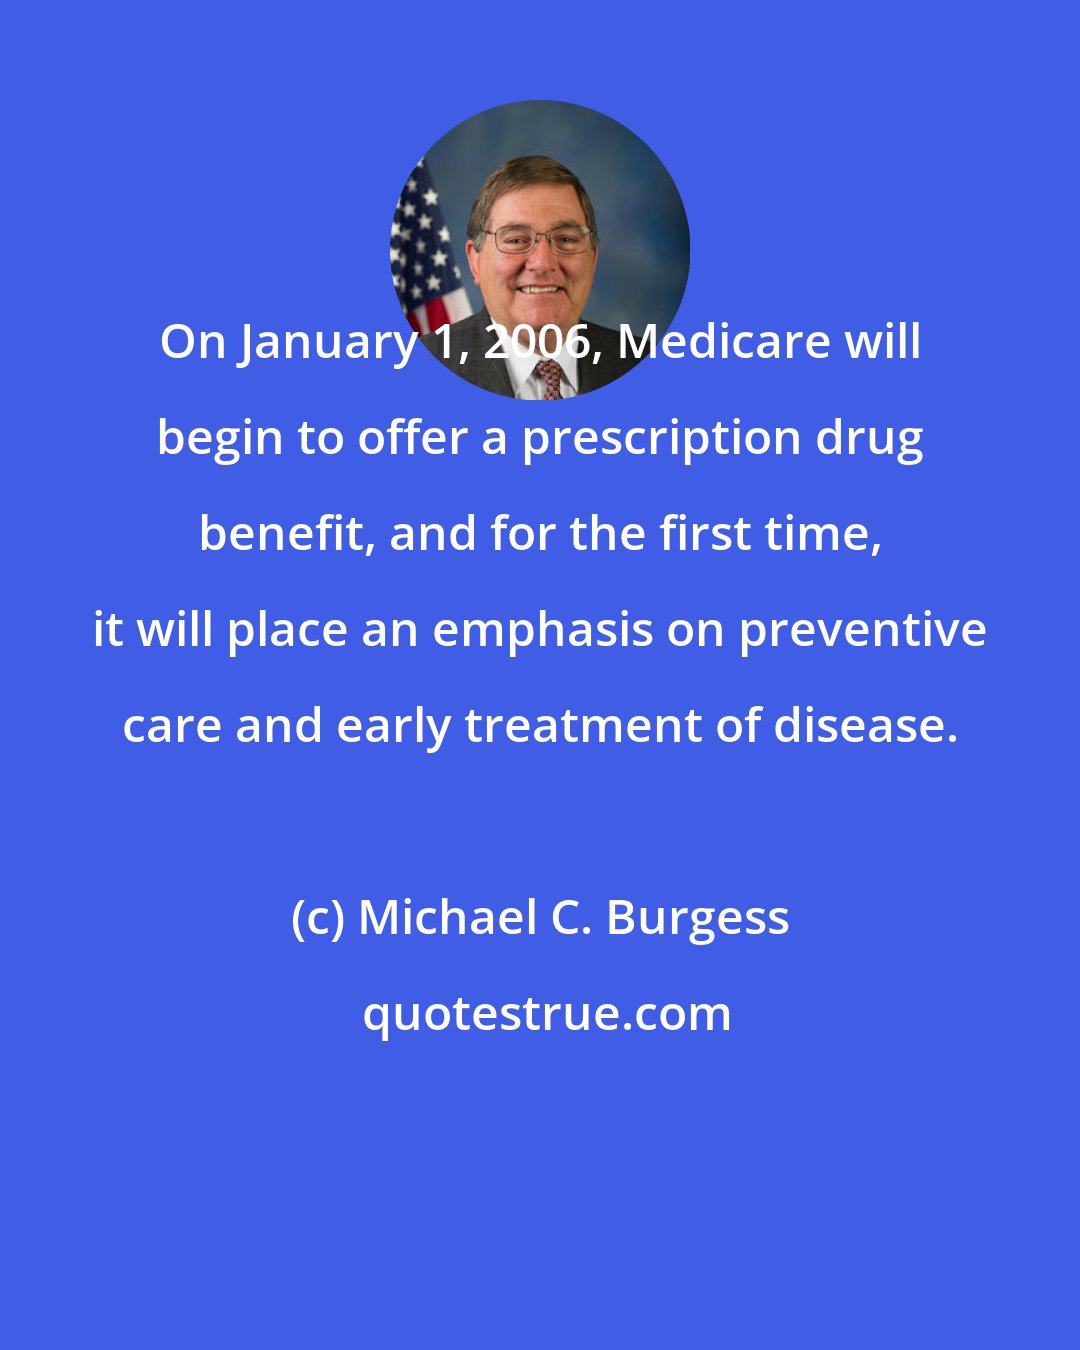 Michael C. Burgess: On January 1, 2006, Medicare will begin to offer a prescription drug benefit, and for the first time, it will place an emphasis on preventive care and early treatment of disease.